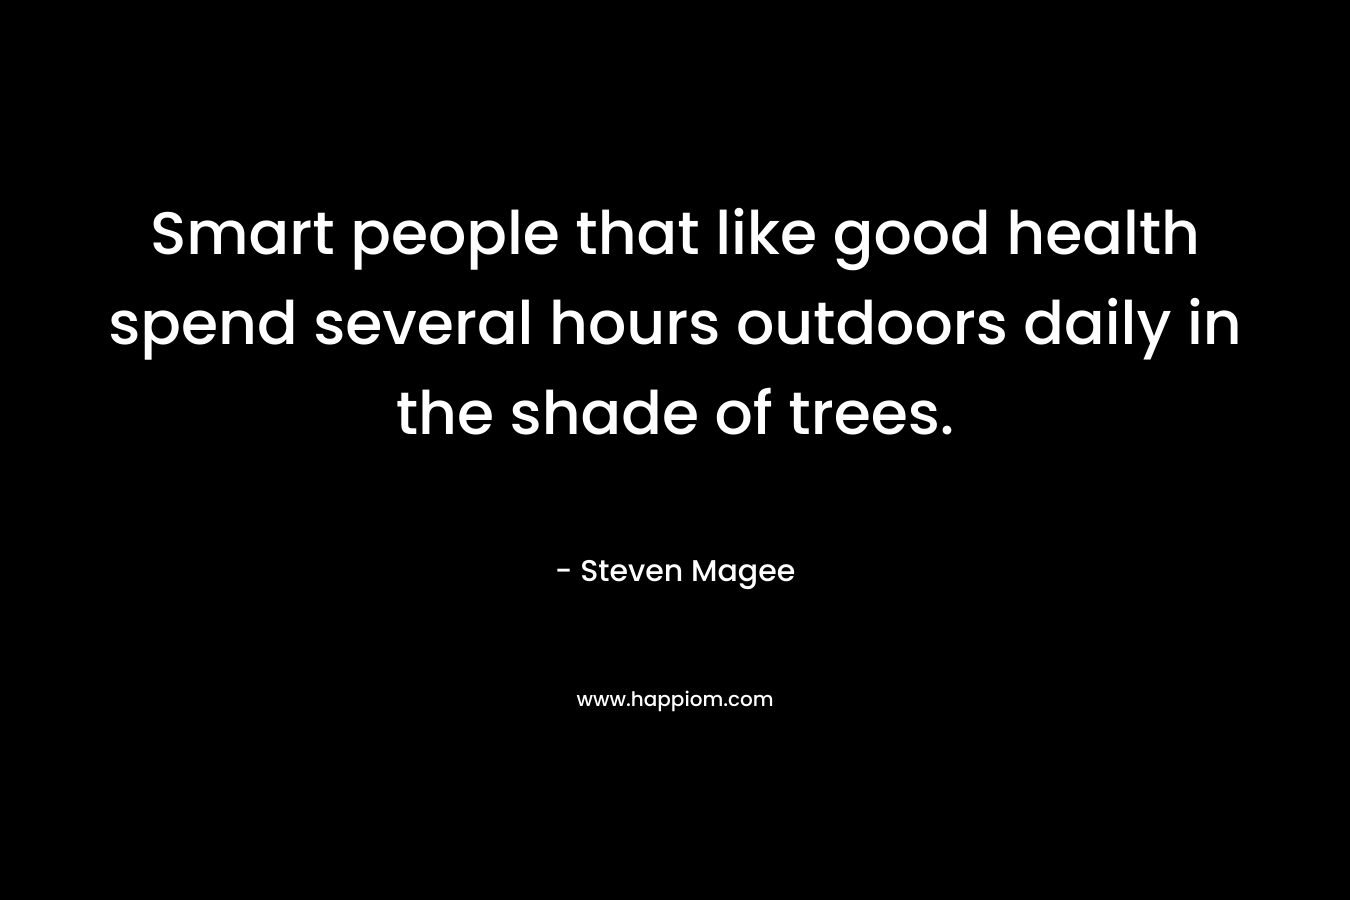 Smart people that like good health spend several hours outdoors daily in the shade of trees.